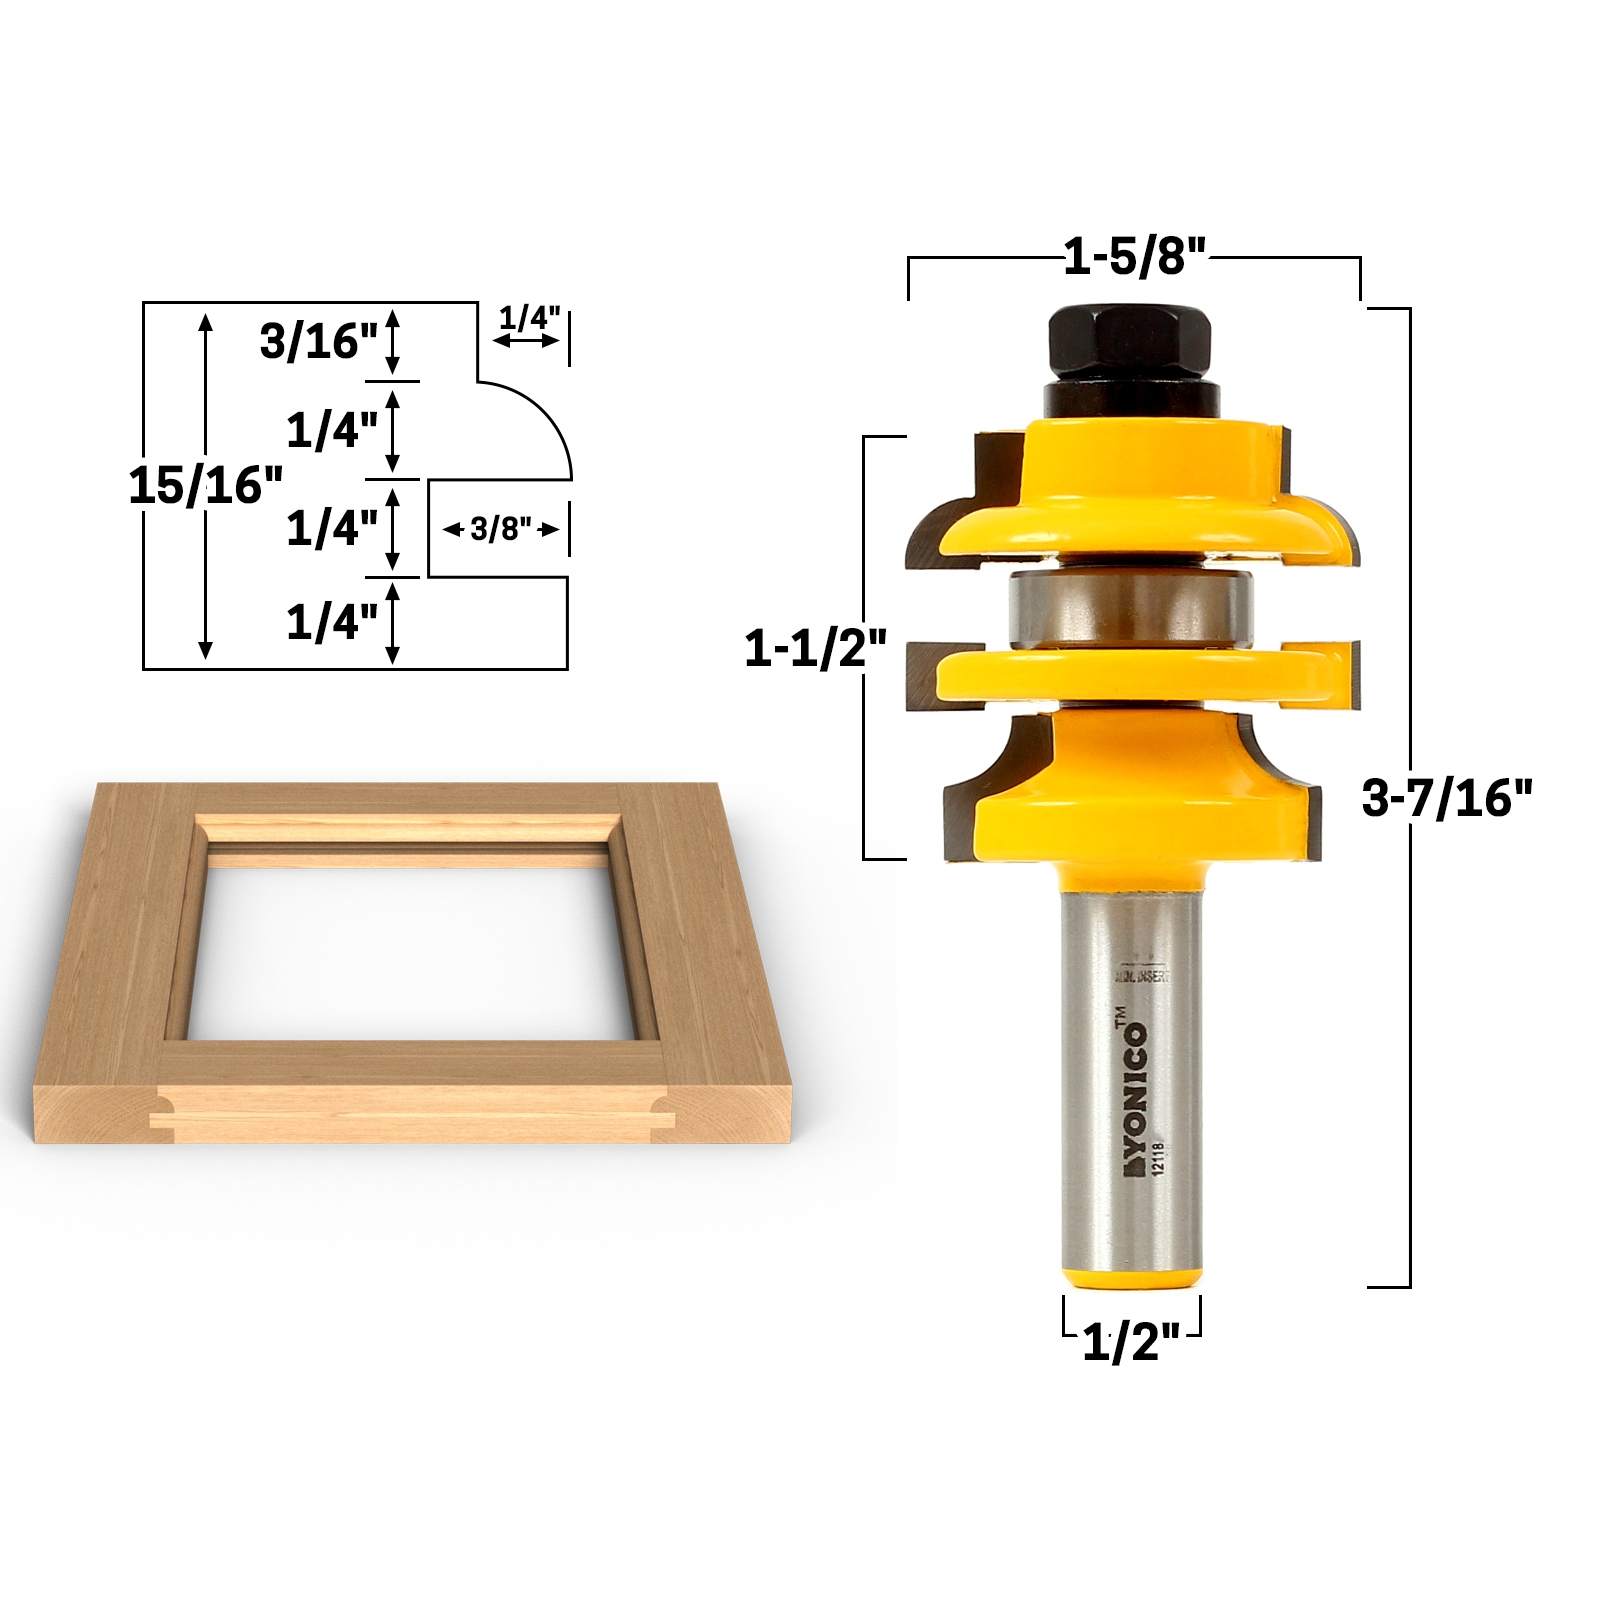 Yonico 12120 1/2" Shank Classical Ogee Stacked Rail and Stile Router Bit 